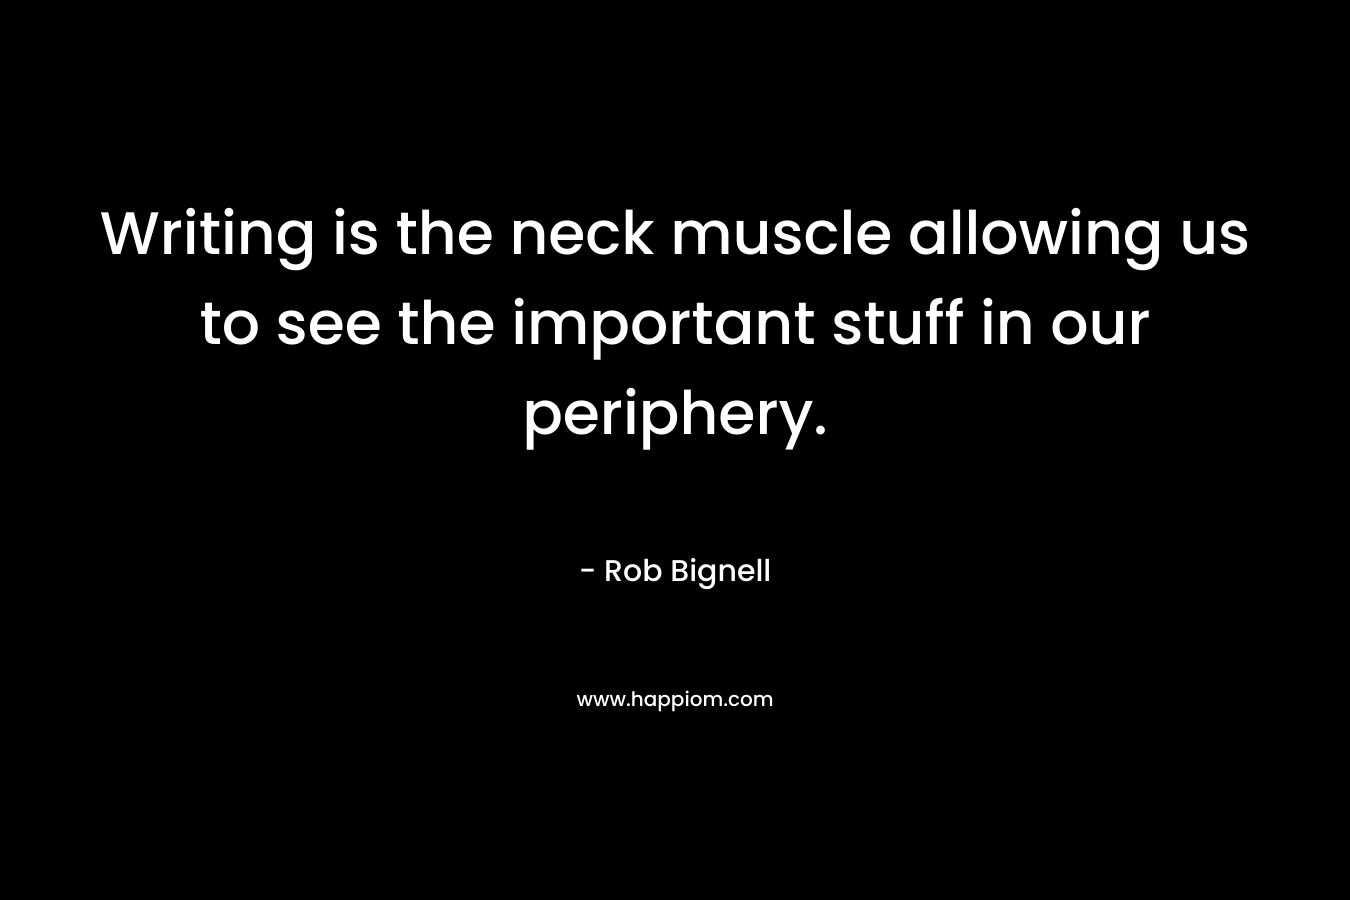 Writing is the neck muscle allowing us to see the important stuff in our periphery.